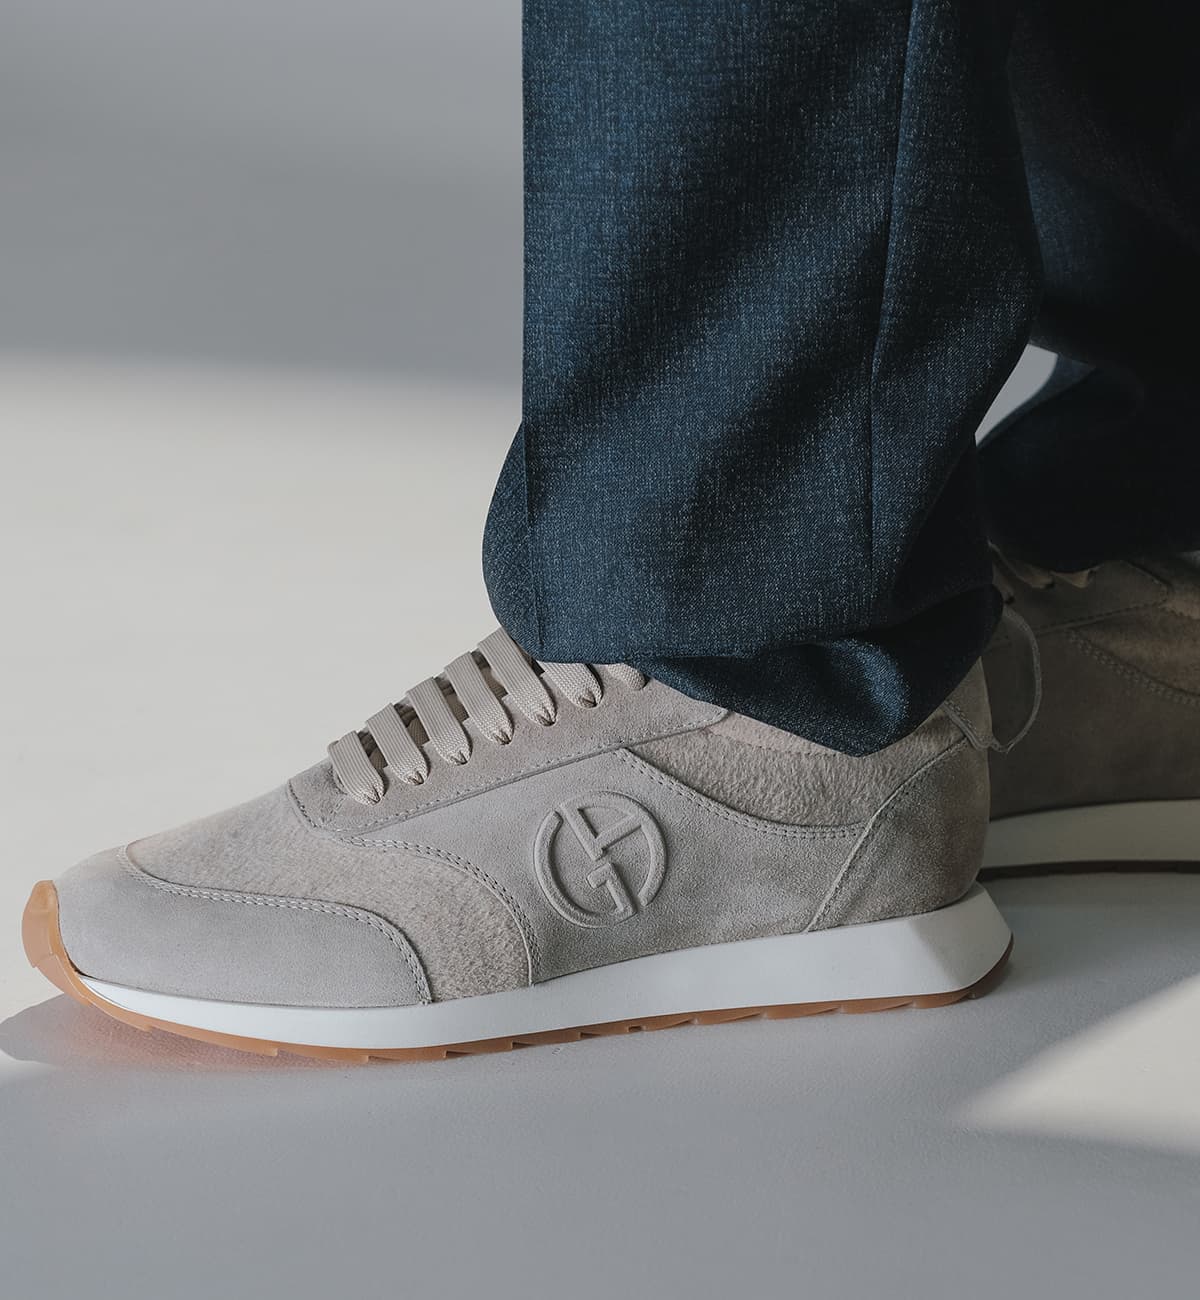 Giorgio Armani suede and wool sneakers. Man's clothing. Fall Autumn 2022